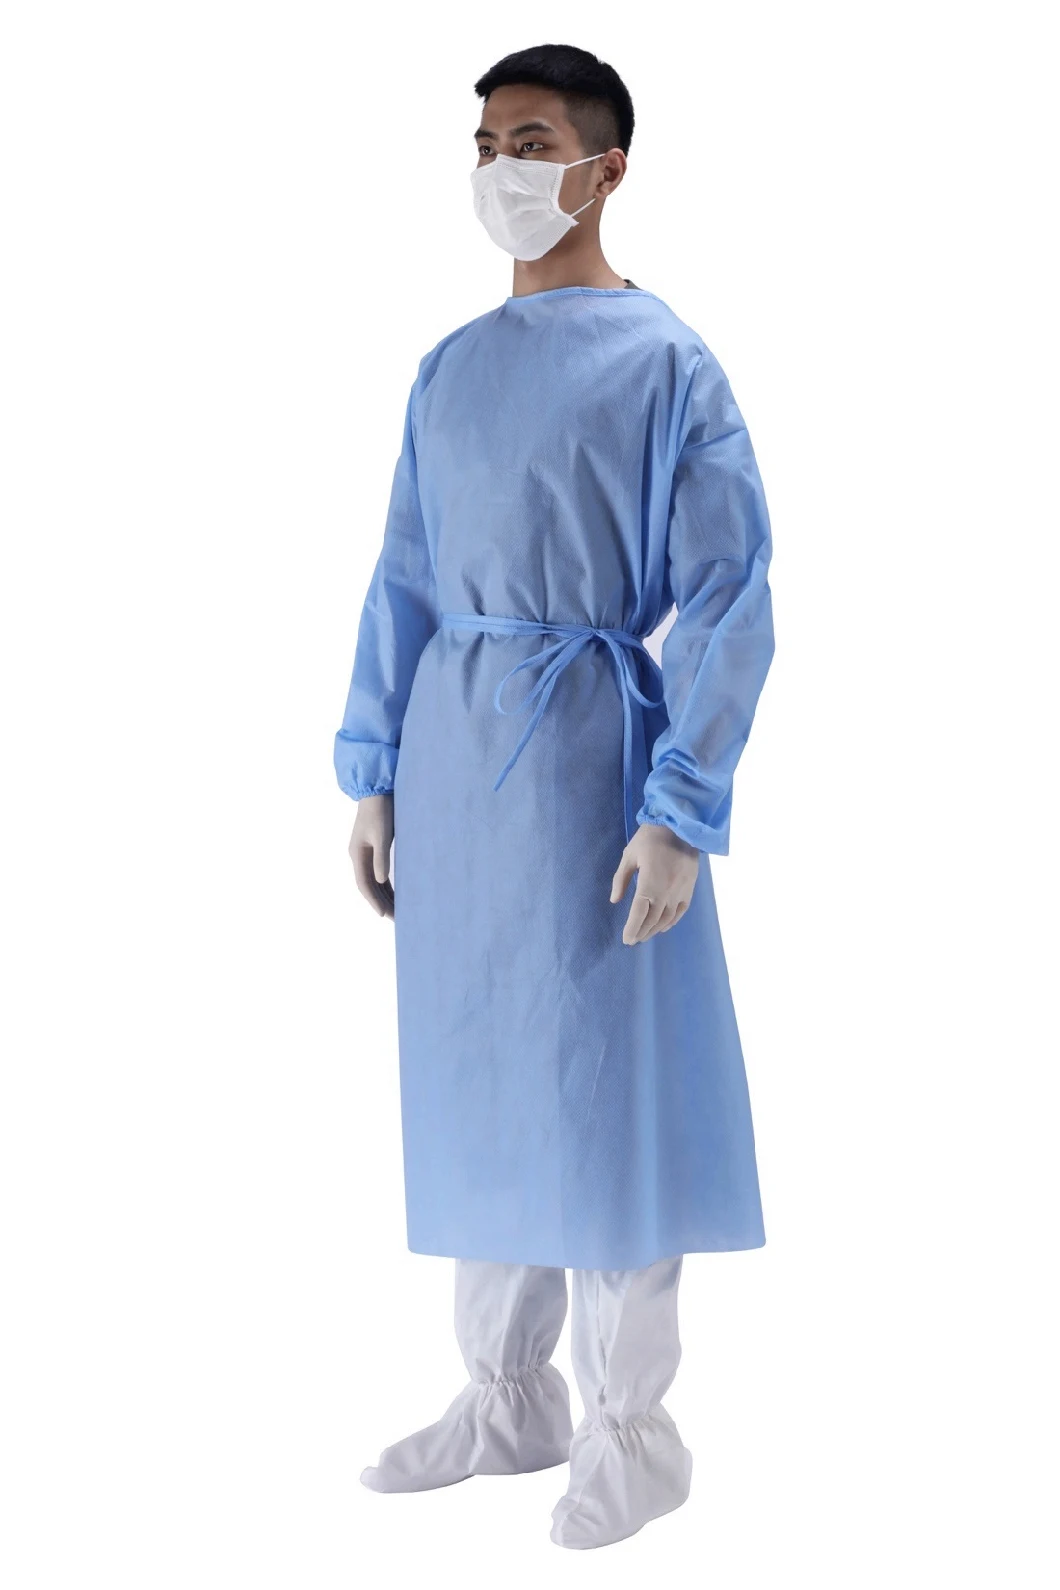 Disposable Chemical Protective Clothing Product Supply Against Splashes with Blue Strips Surgical Isolation Gown